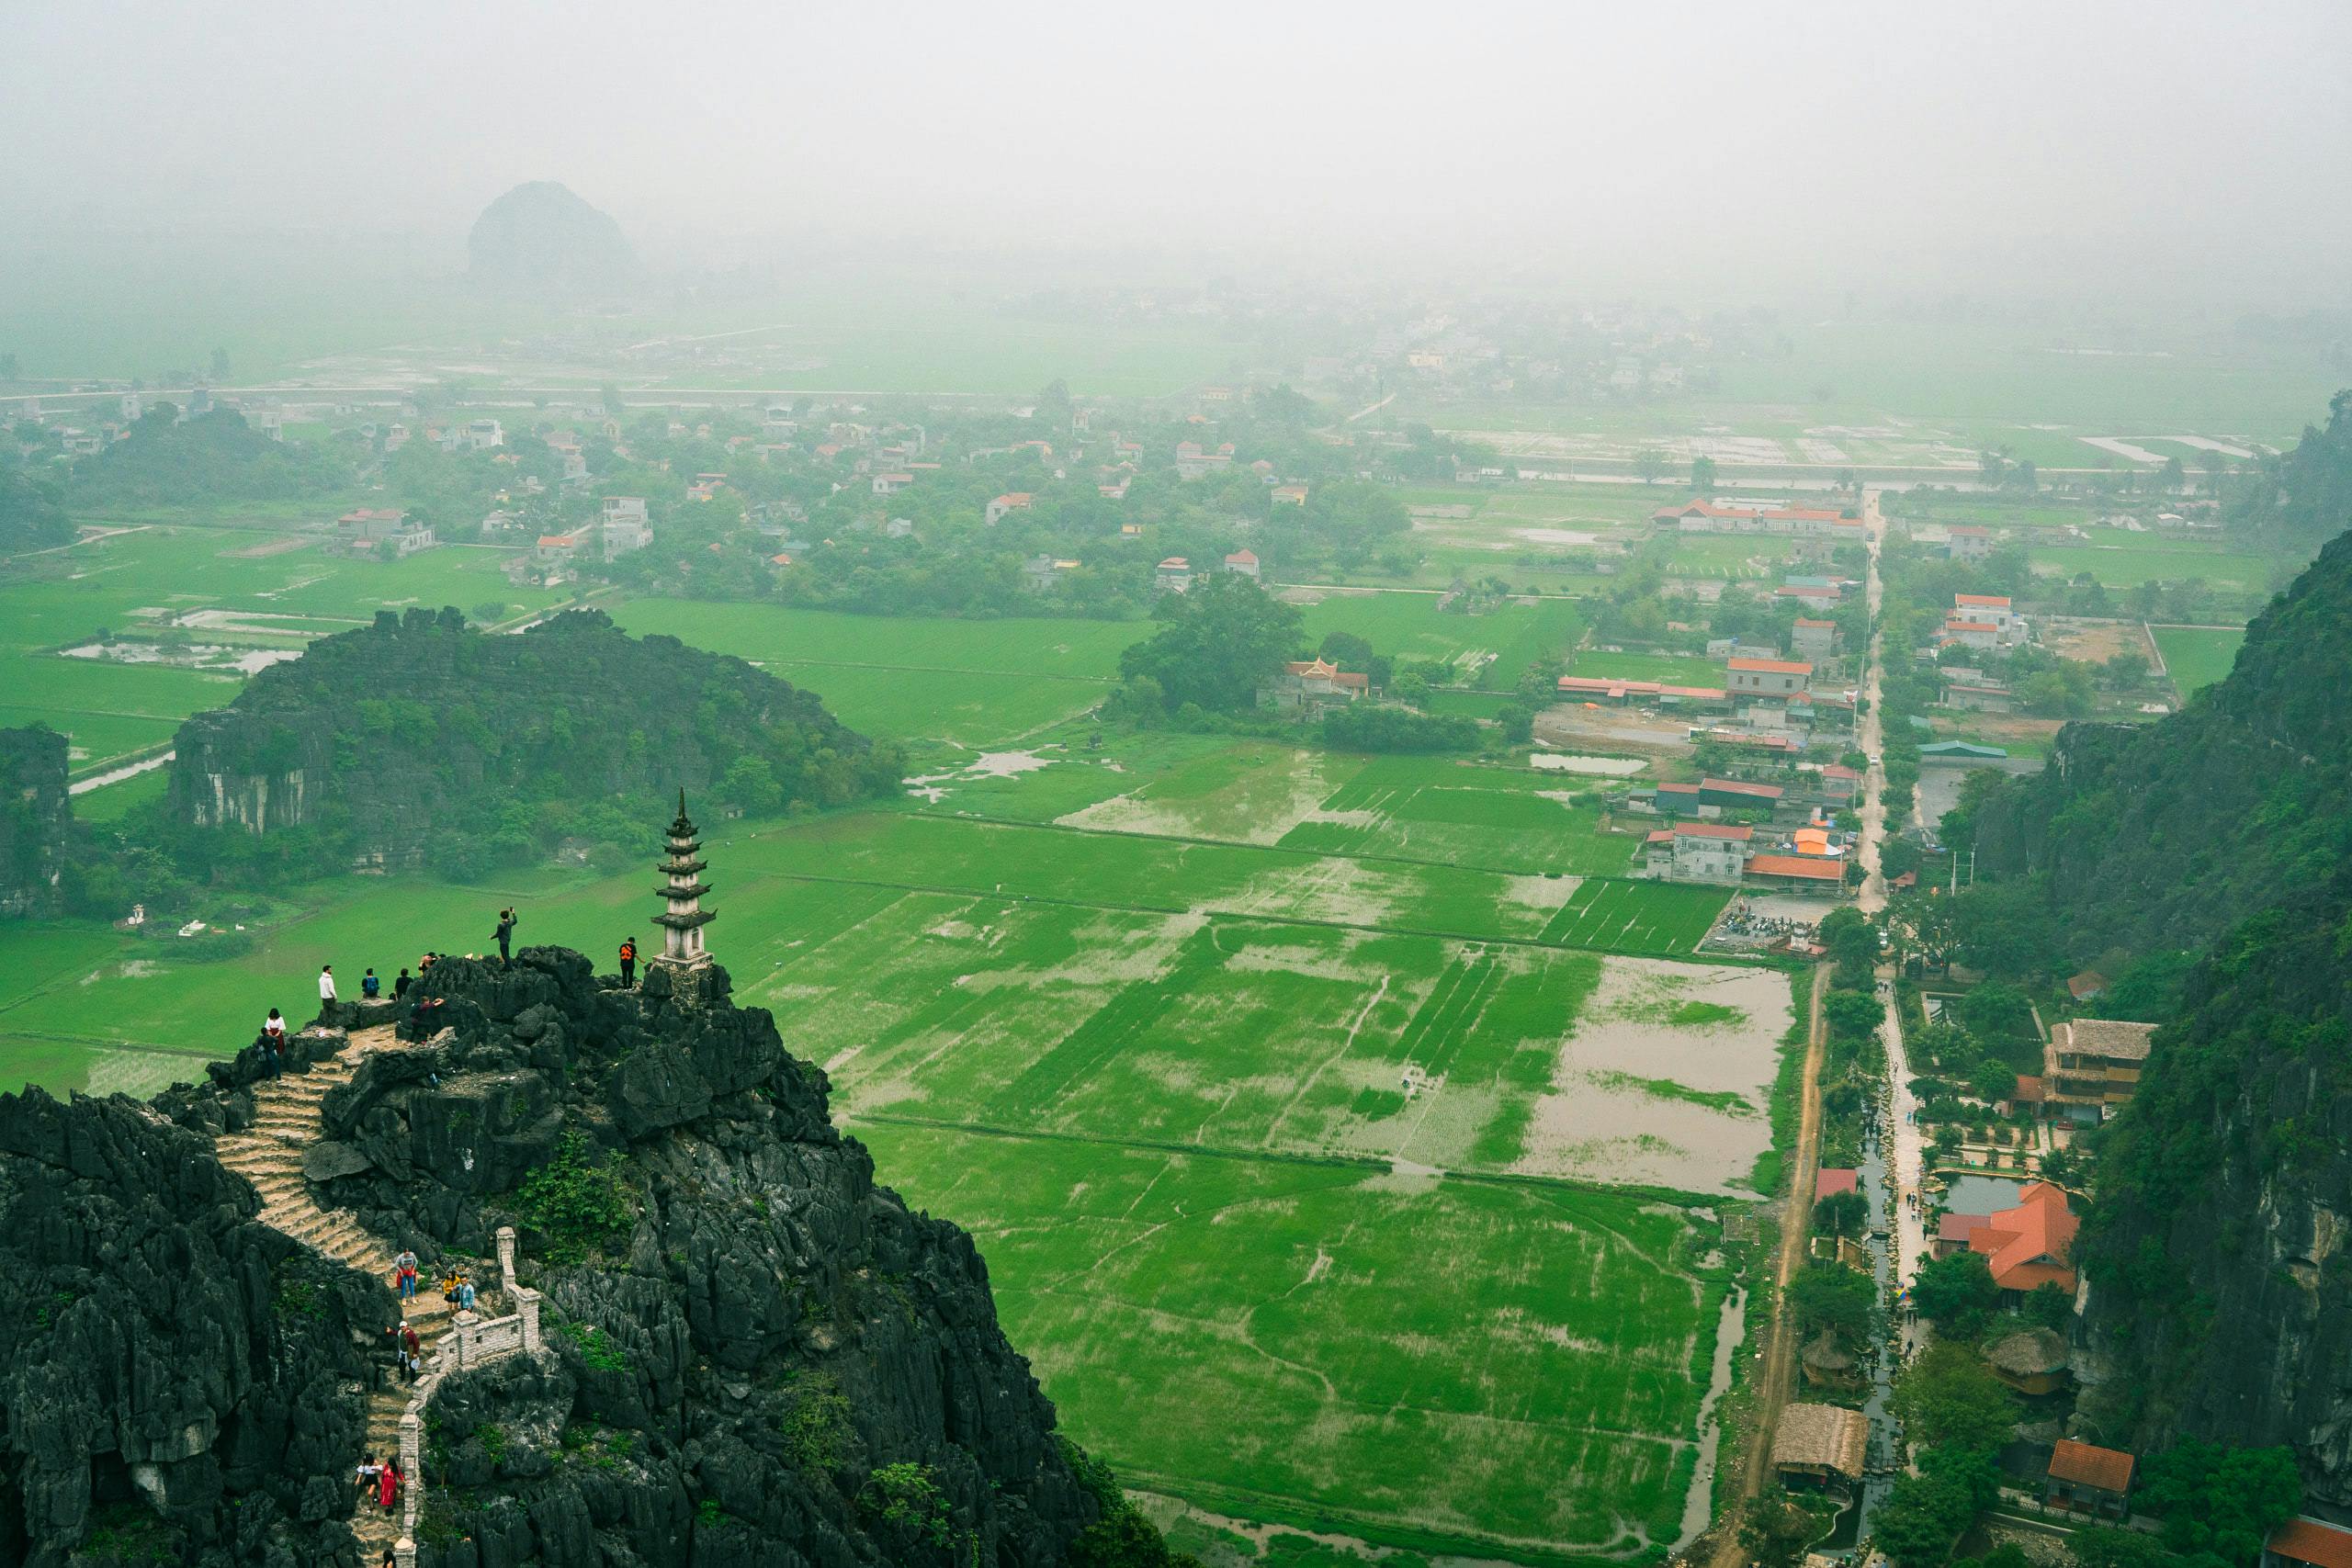 Foggy ricefield landscape from a high viewpoint